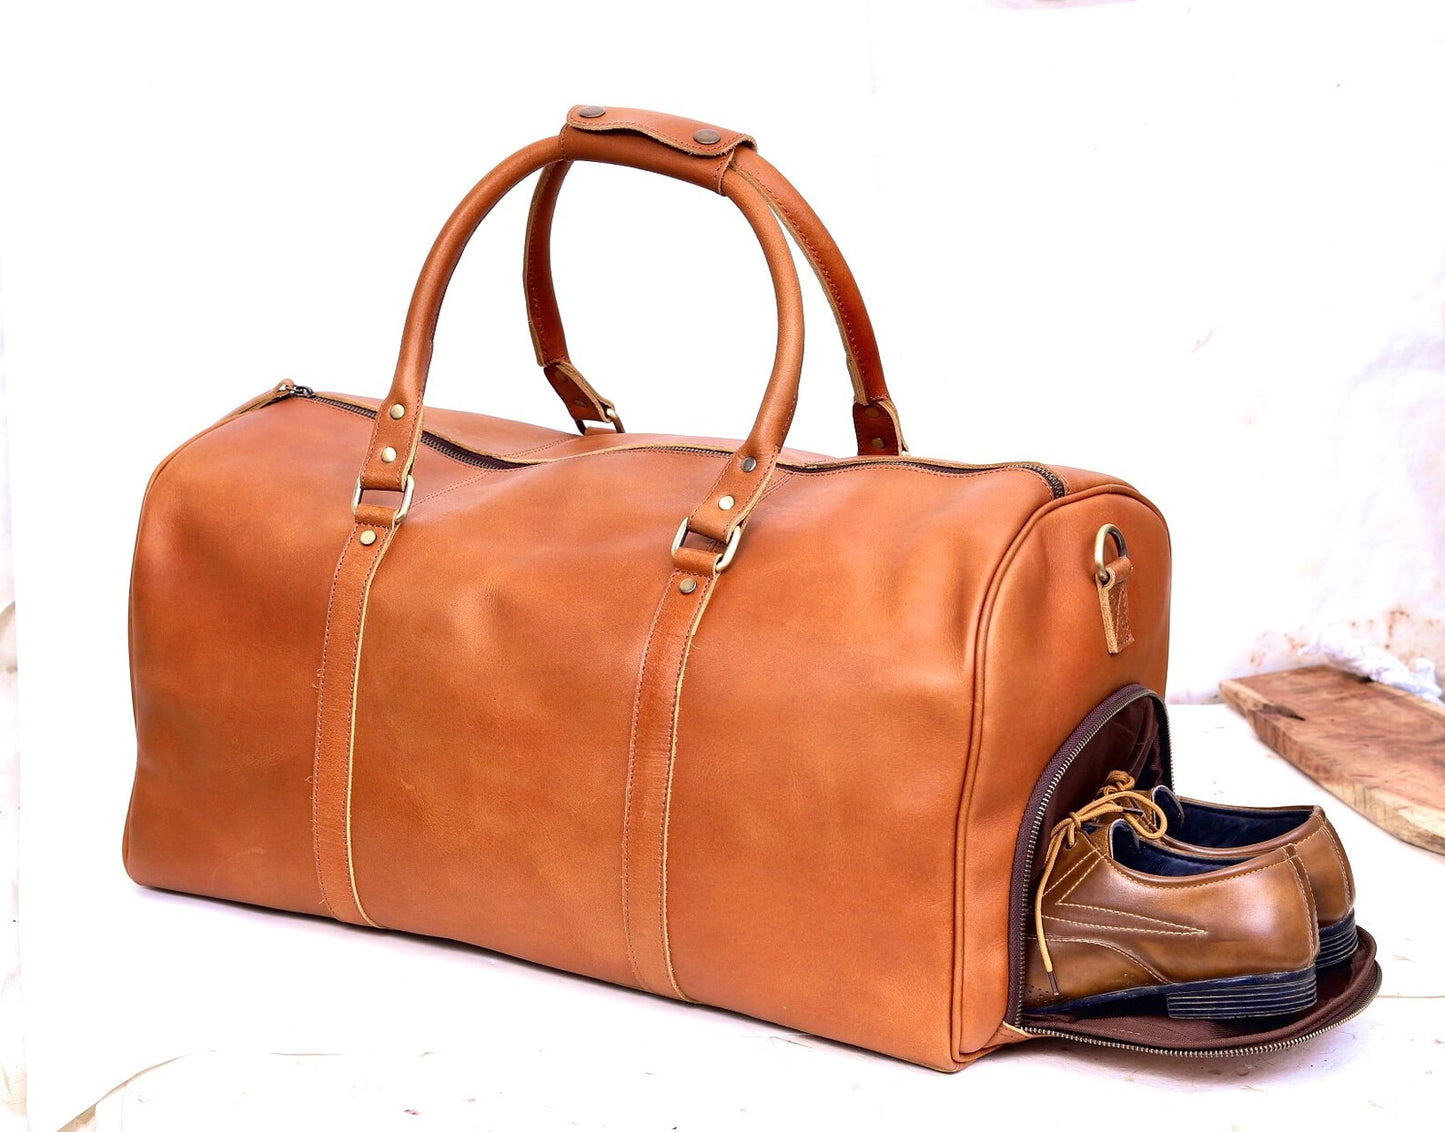 Large Leather Holdall Duffle Bag